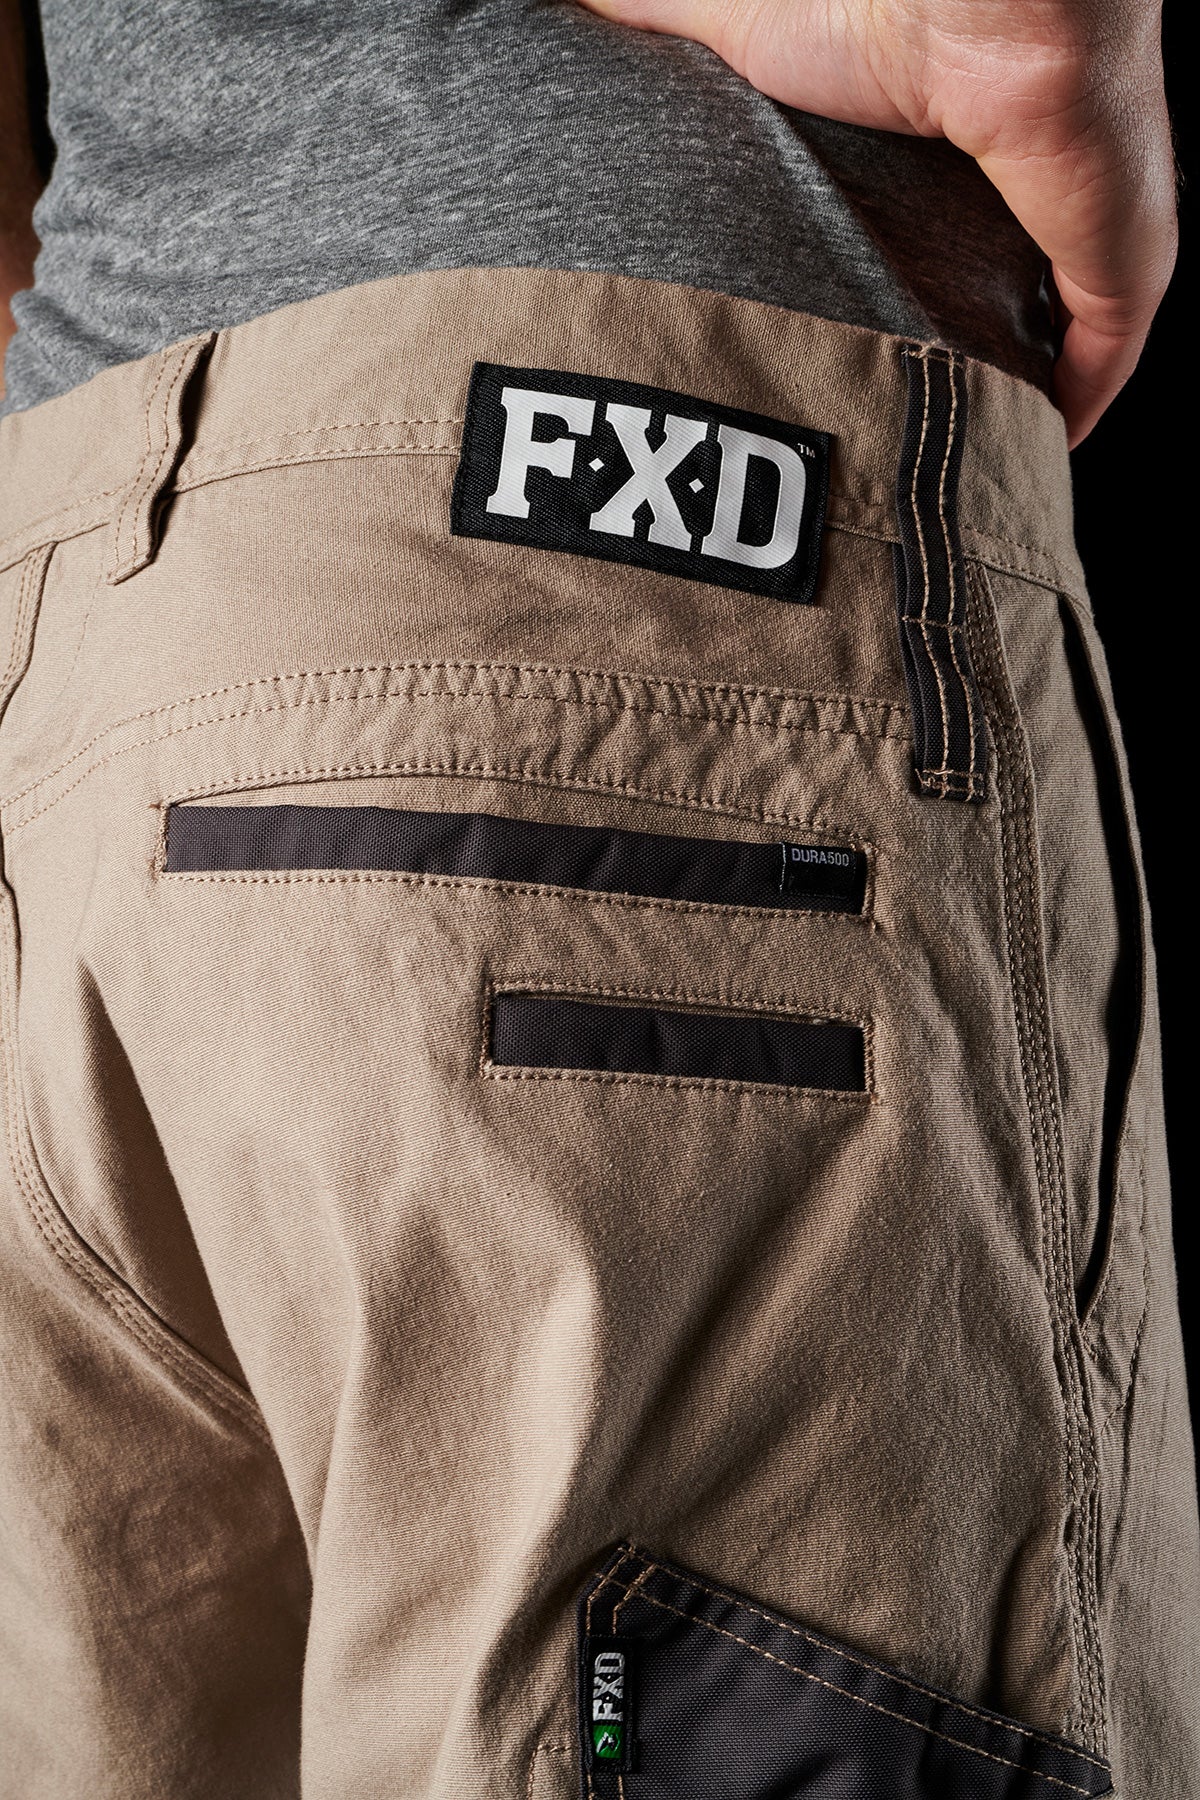 FXD WP.4T REFLECTIVE STRETCH CUFFED WORK PANTS ARE AS/NZS 1906.4-2010  RETROFLECTIVE MATERIAL COMPLIANT AND FEATURE 3M SCOTCHLITE™ BIOMO